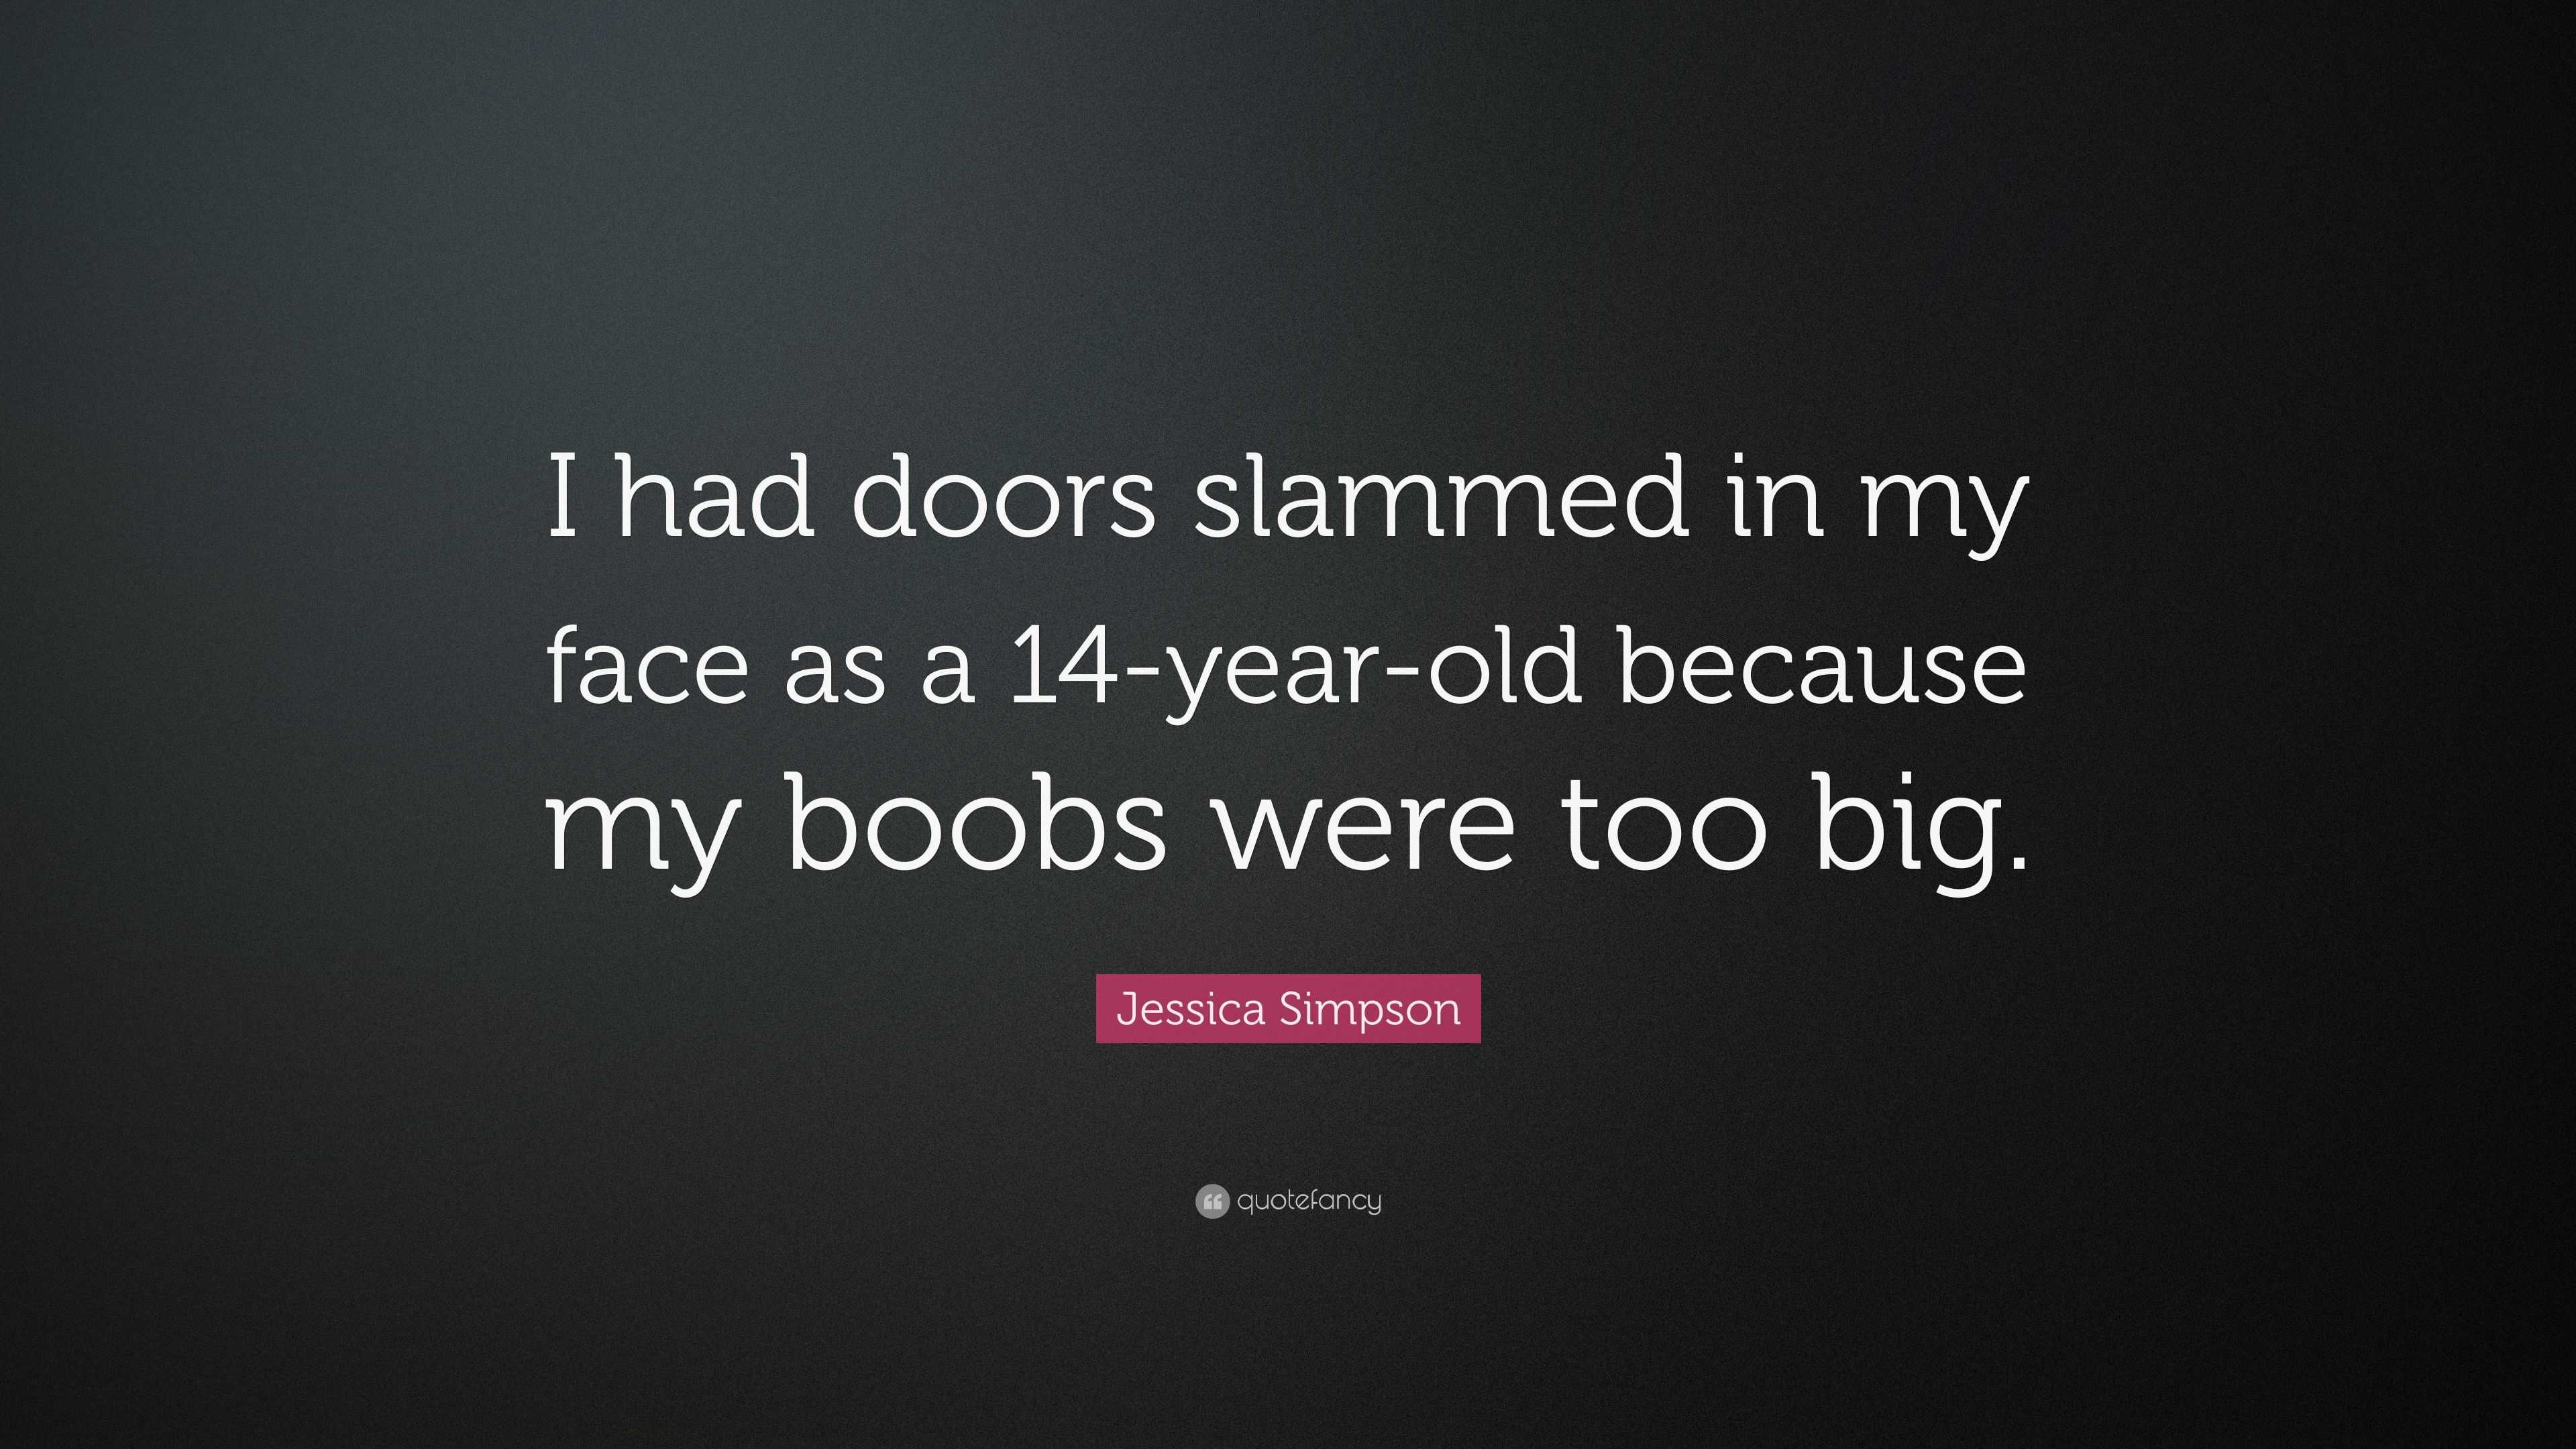 Jessica Simpson Quote: “I had doors slammed in my face as a 14